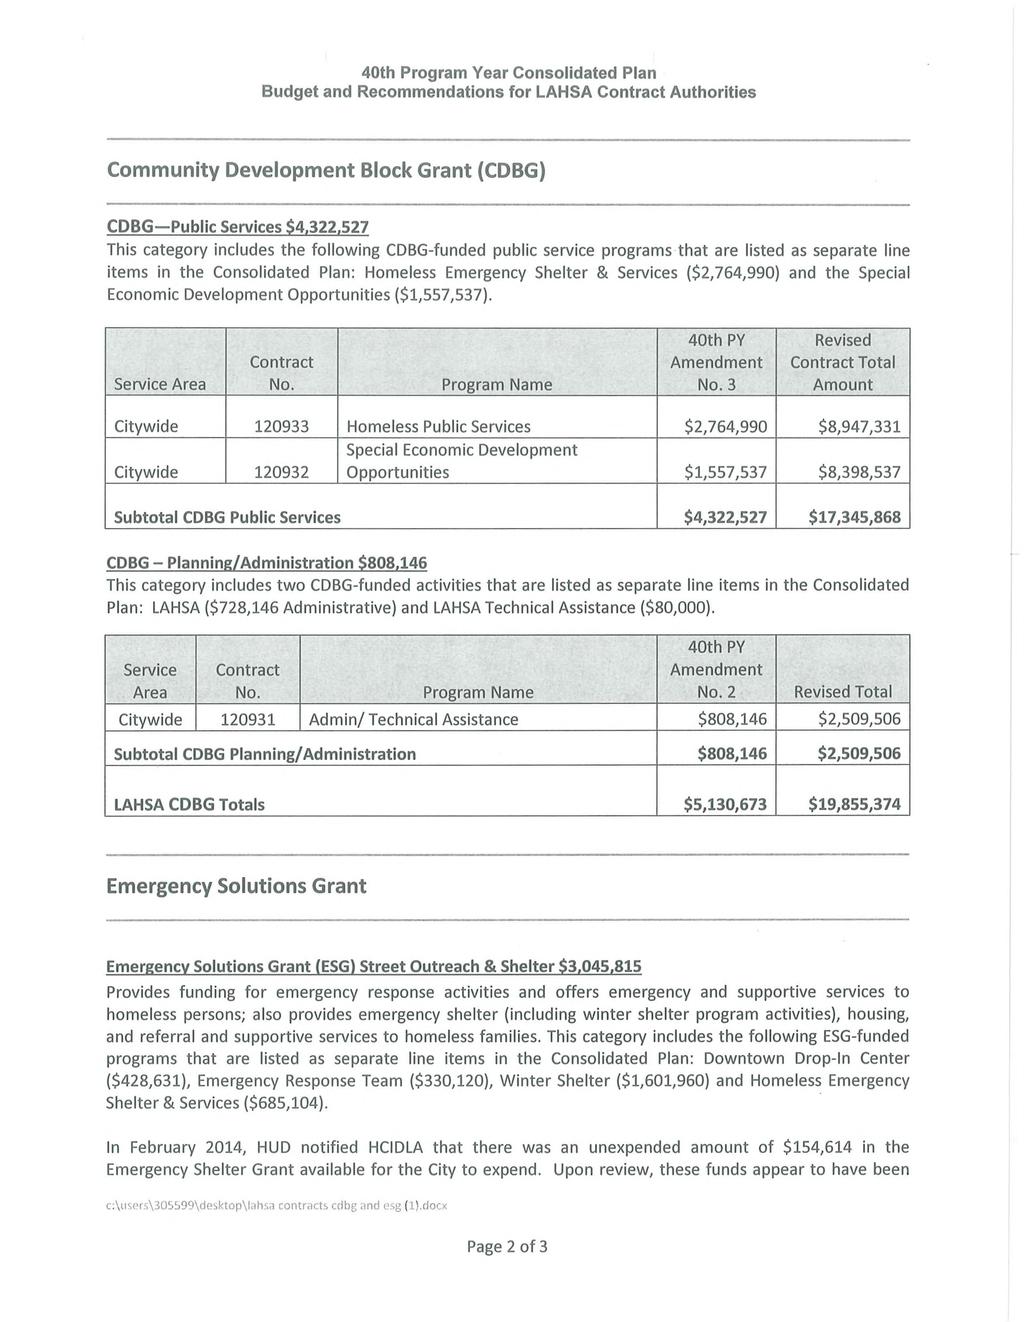 Community Development Block Grant (CDBG) CDBG-Public Services $4,322,527 This category includes the following CDBG-funded public service programs that are listed as separate line items in the